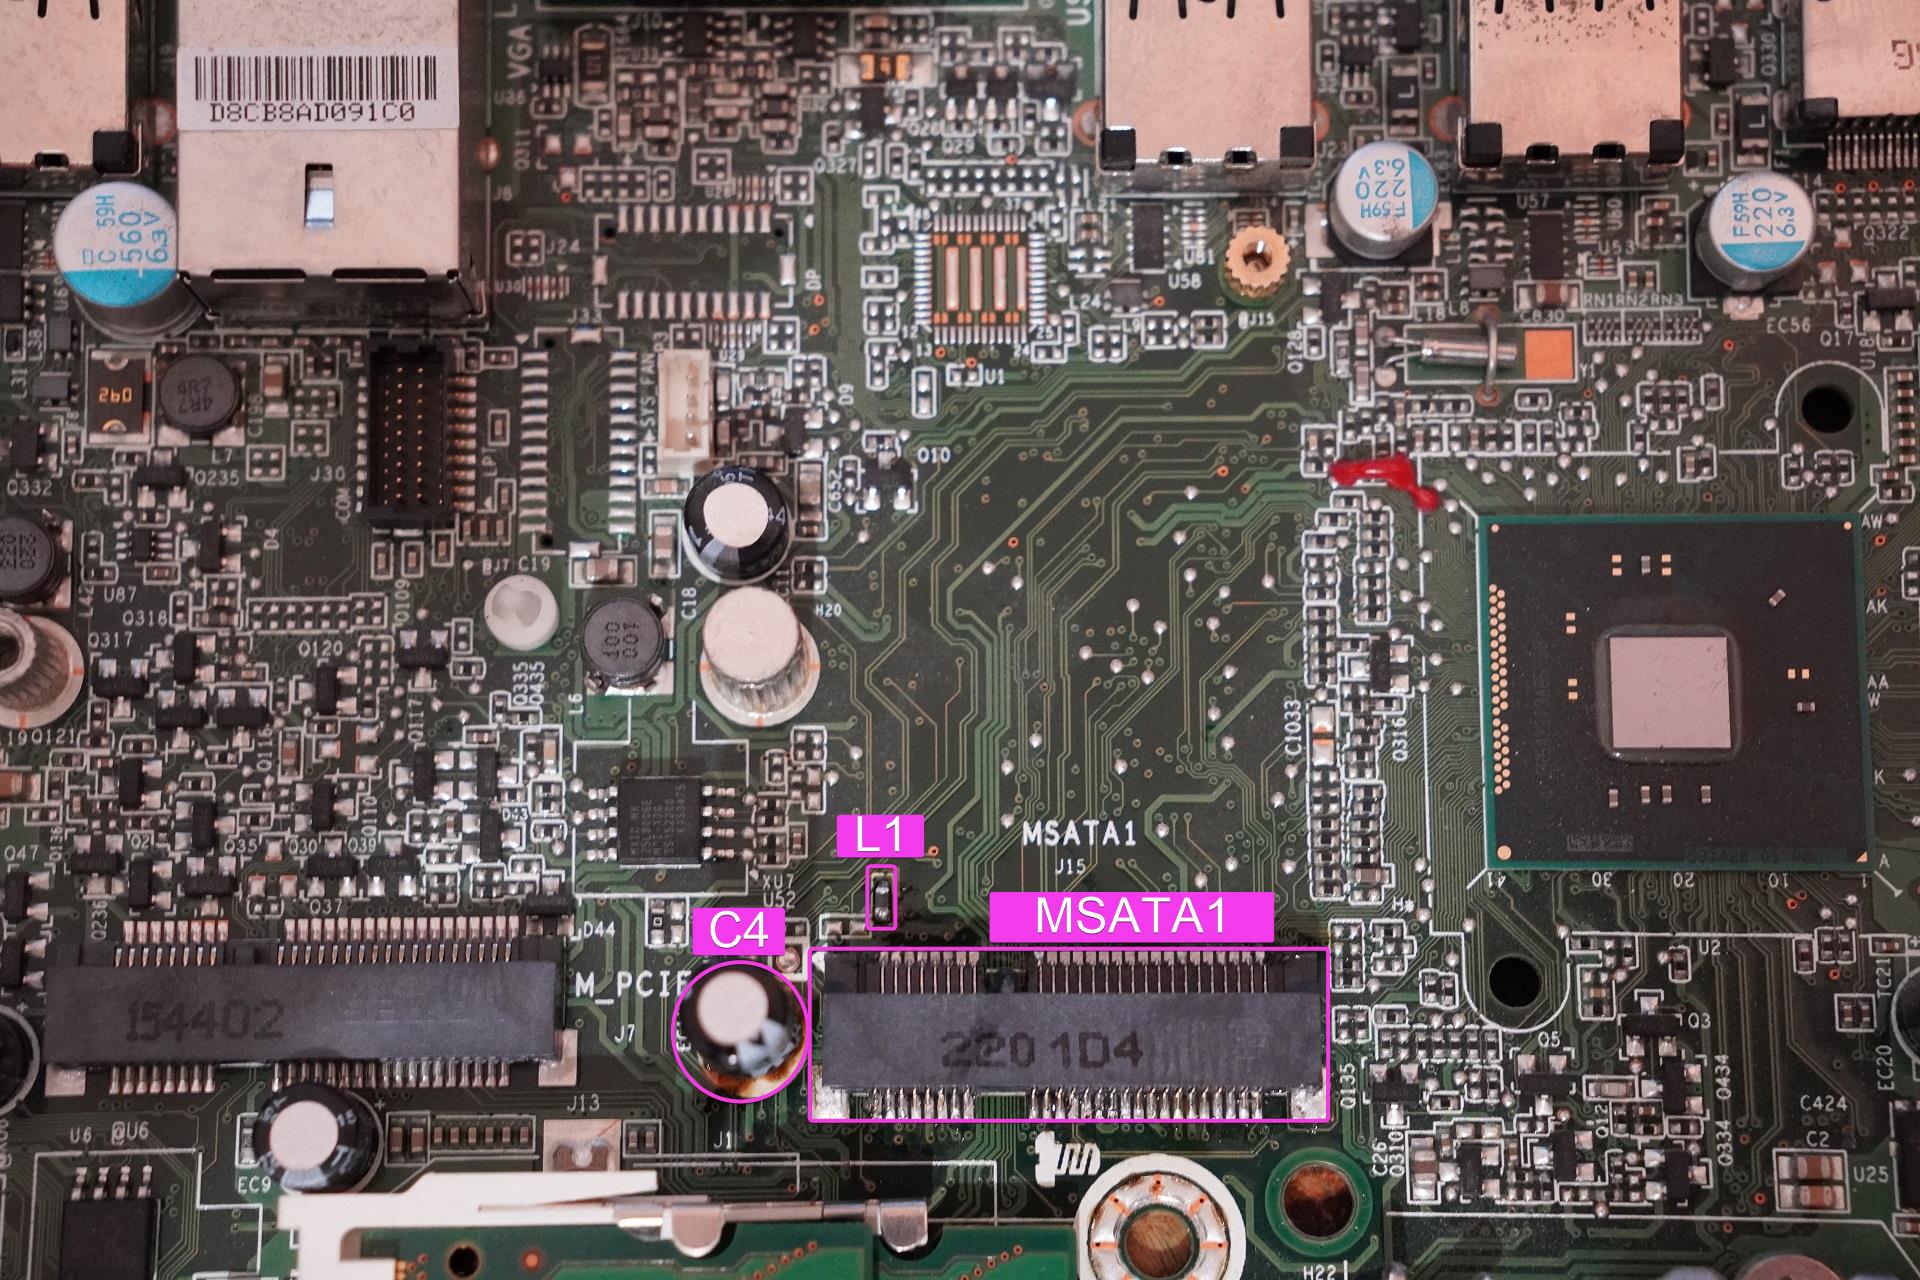 Motherboard top-side components.